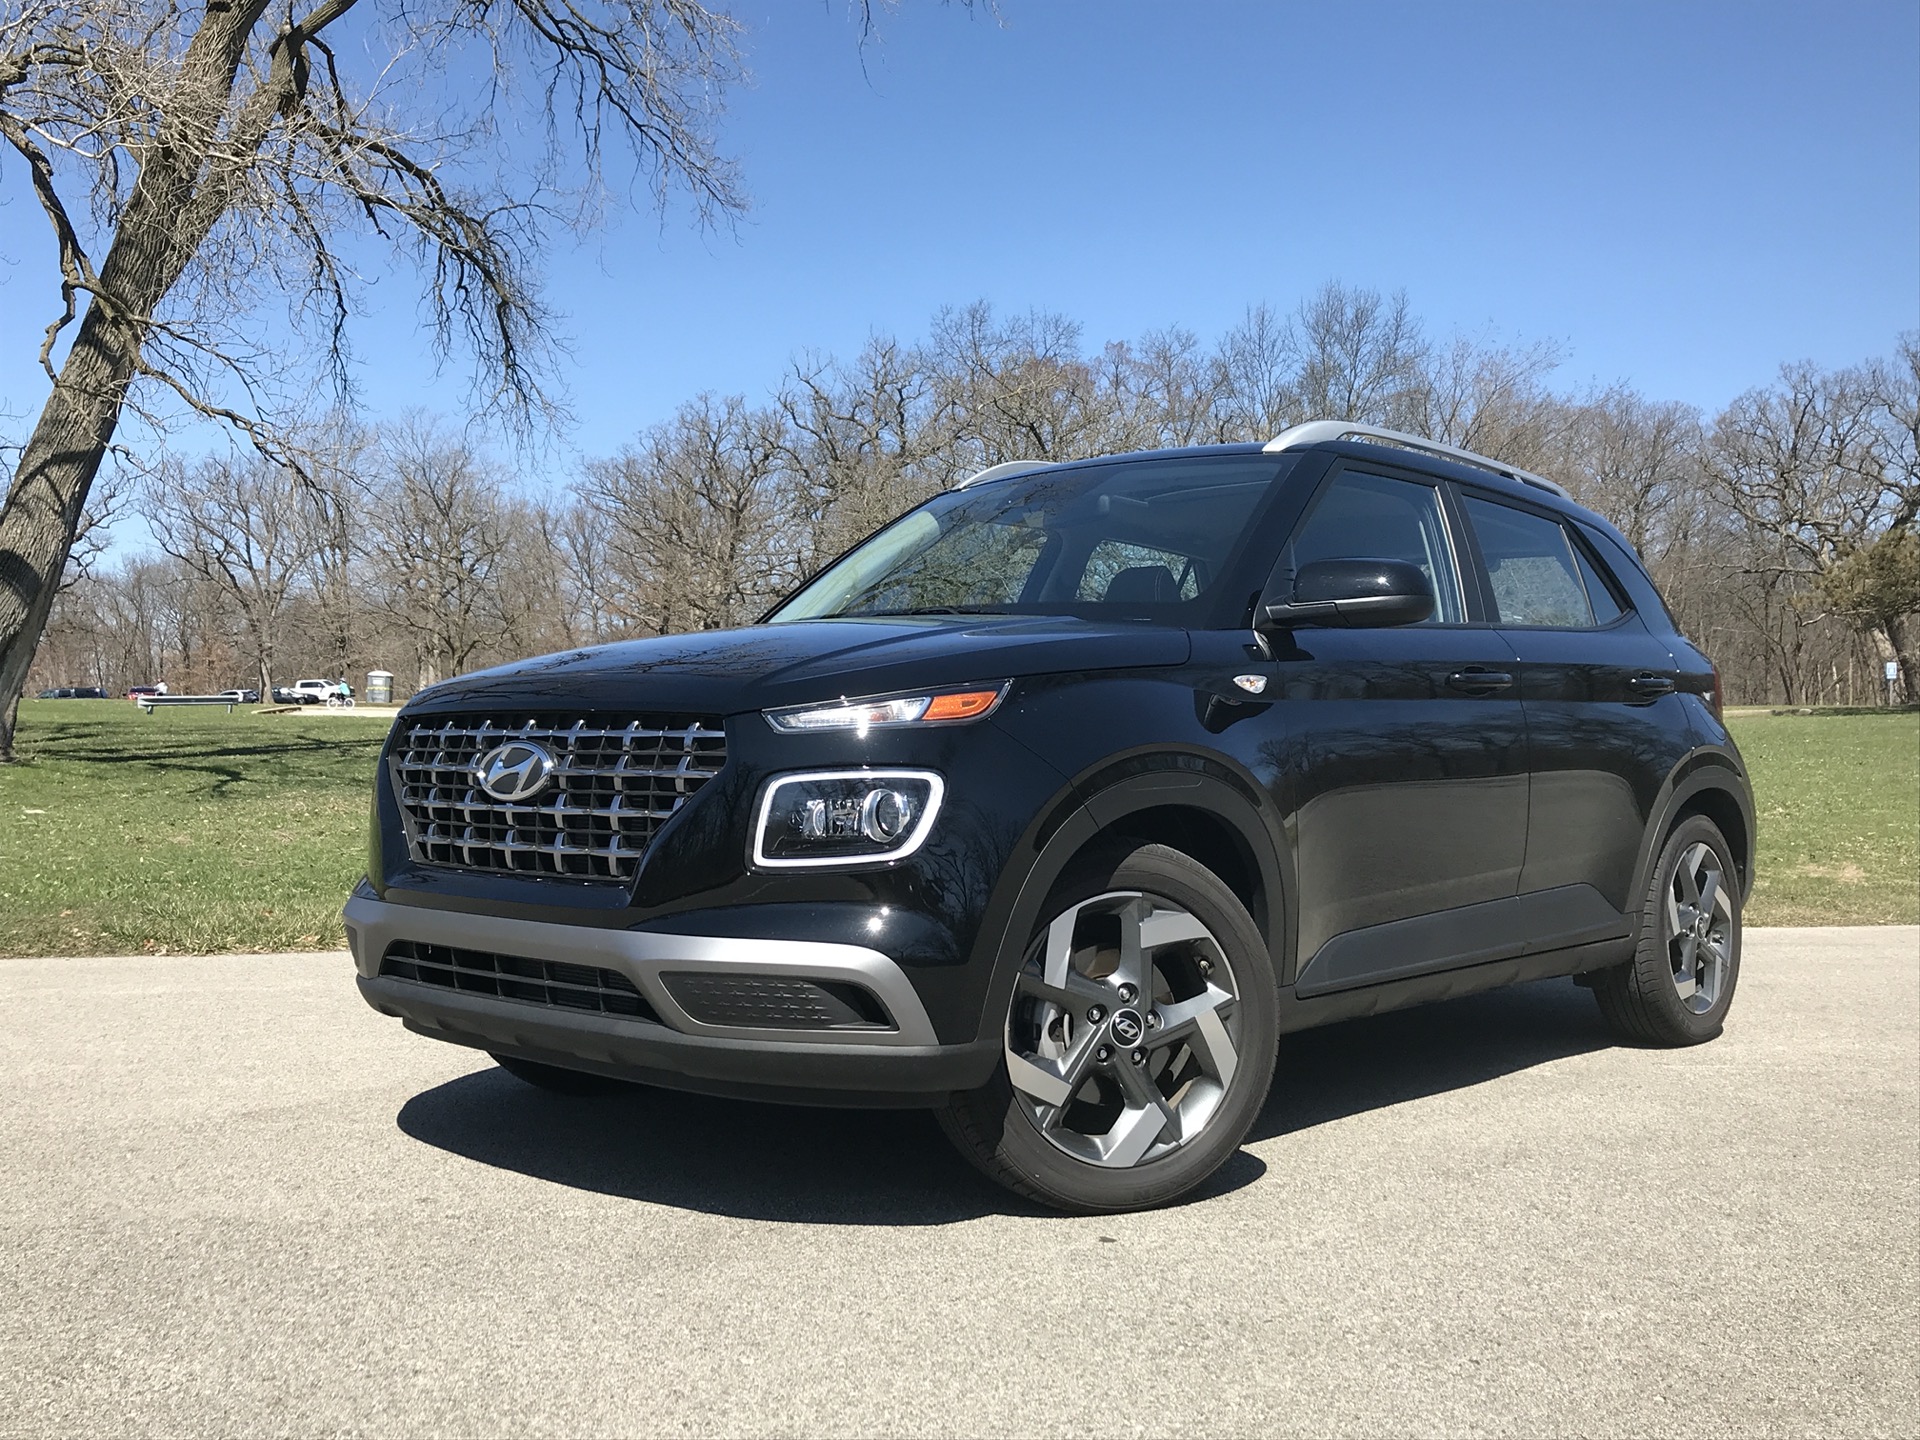 Review update: 2020 Hyundai Venue SEL packs big value in a small space